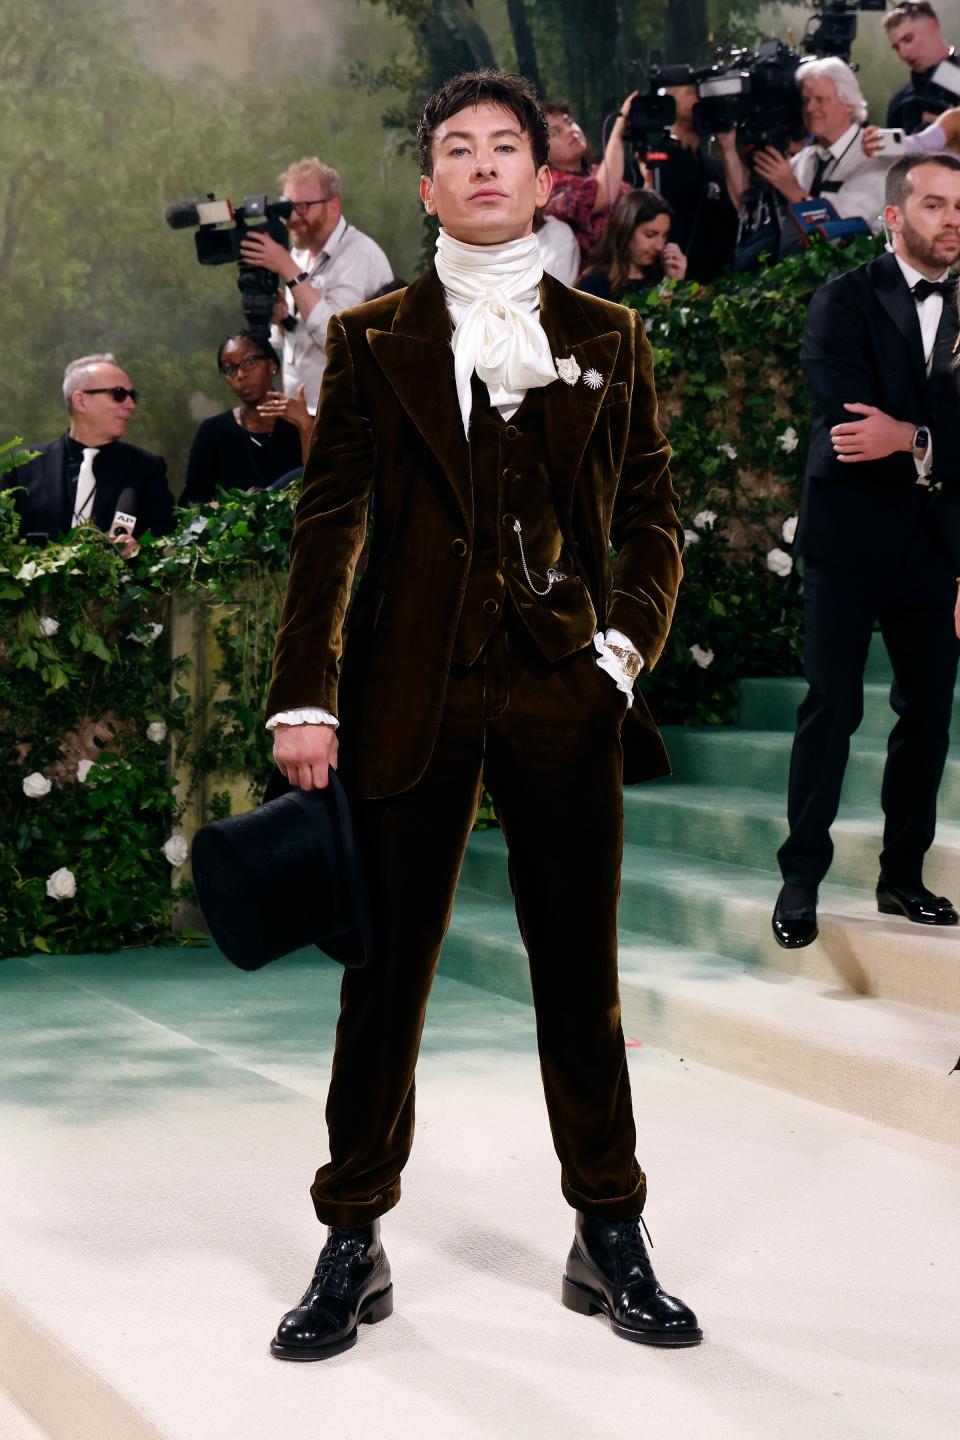 We love it when the guys have fun with their Met Gala looks — even if they ruffle some feathers. It might not be everyone's cup of tea, but Barry Keoghan nailed it with his velvet suit, cravat, and top hat, leaning all the way into the theme.